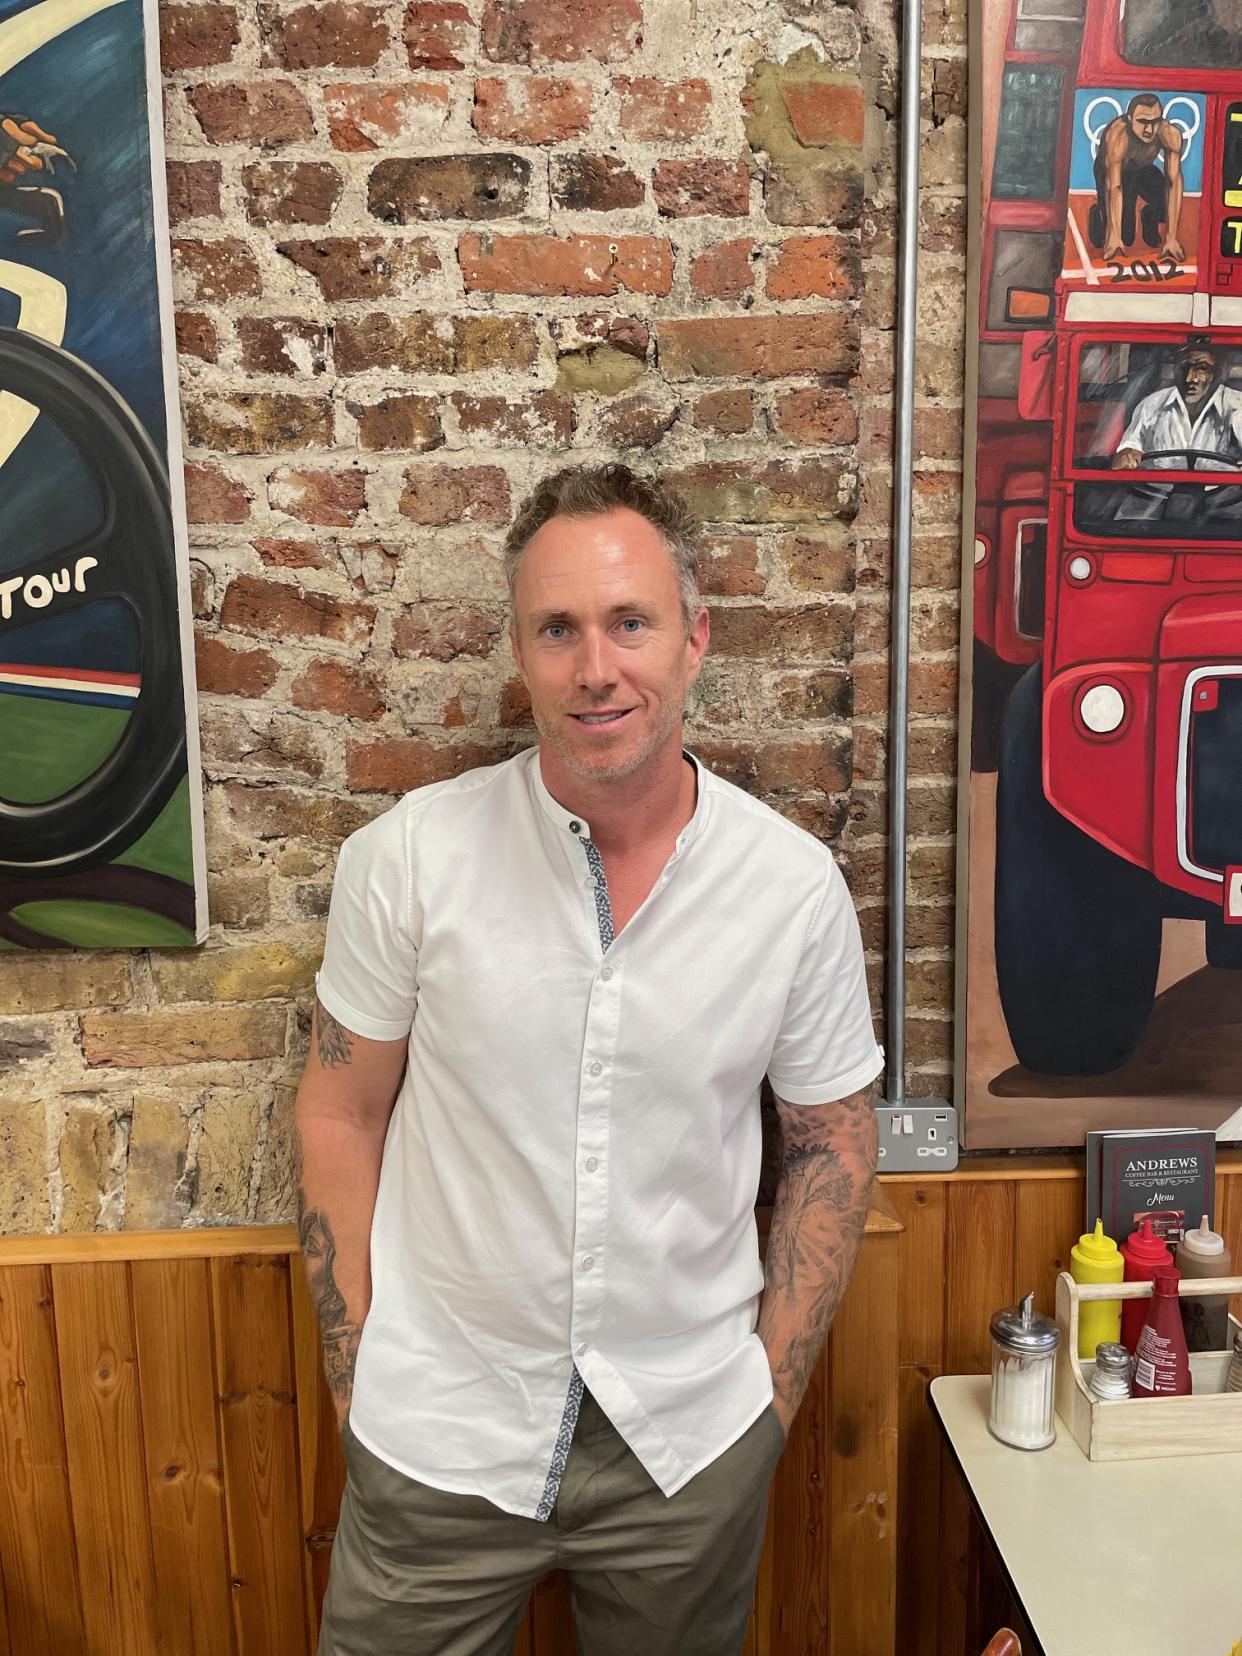 Former Strictly Come Dancing pro James Jordan is also backing Stoptober this year.